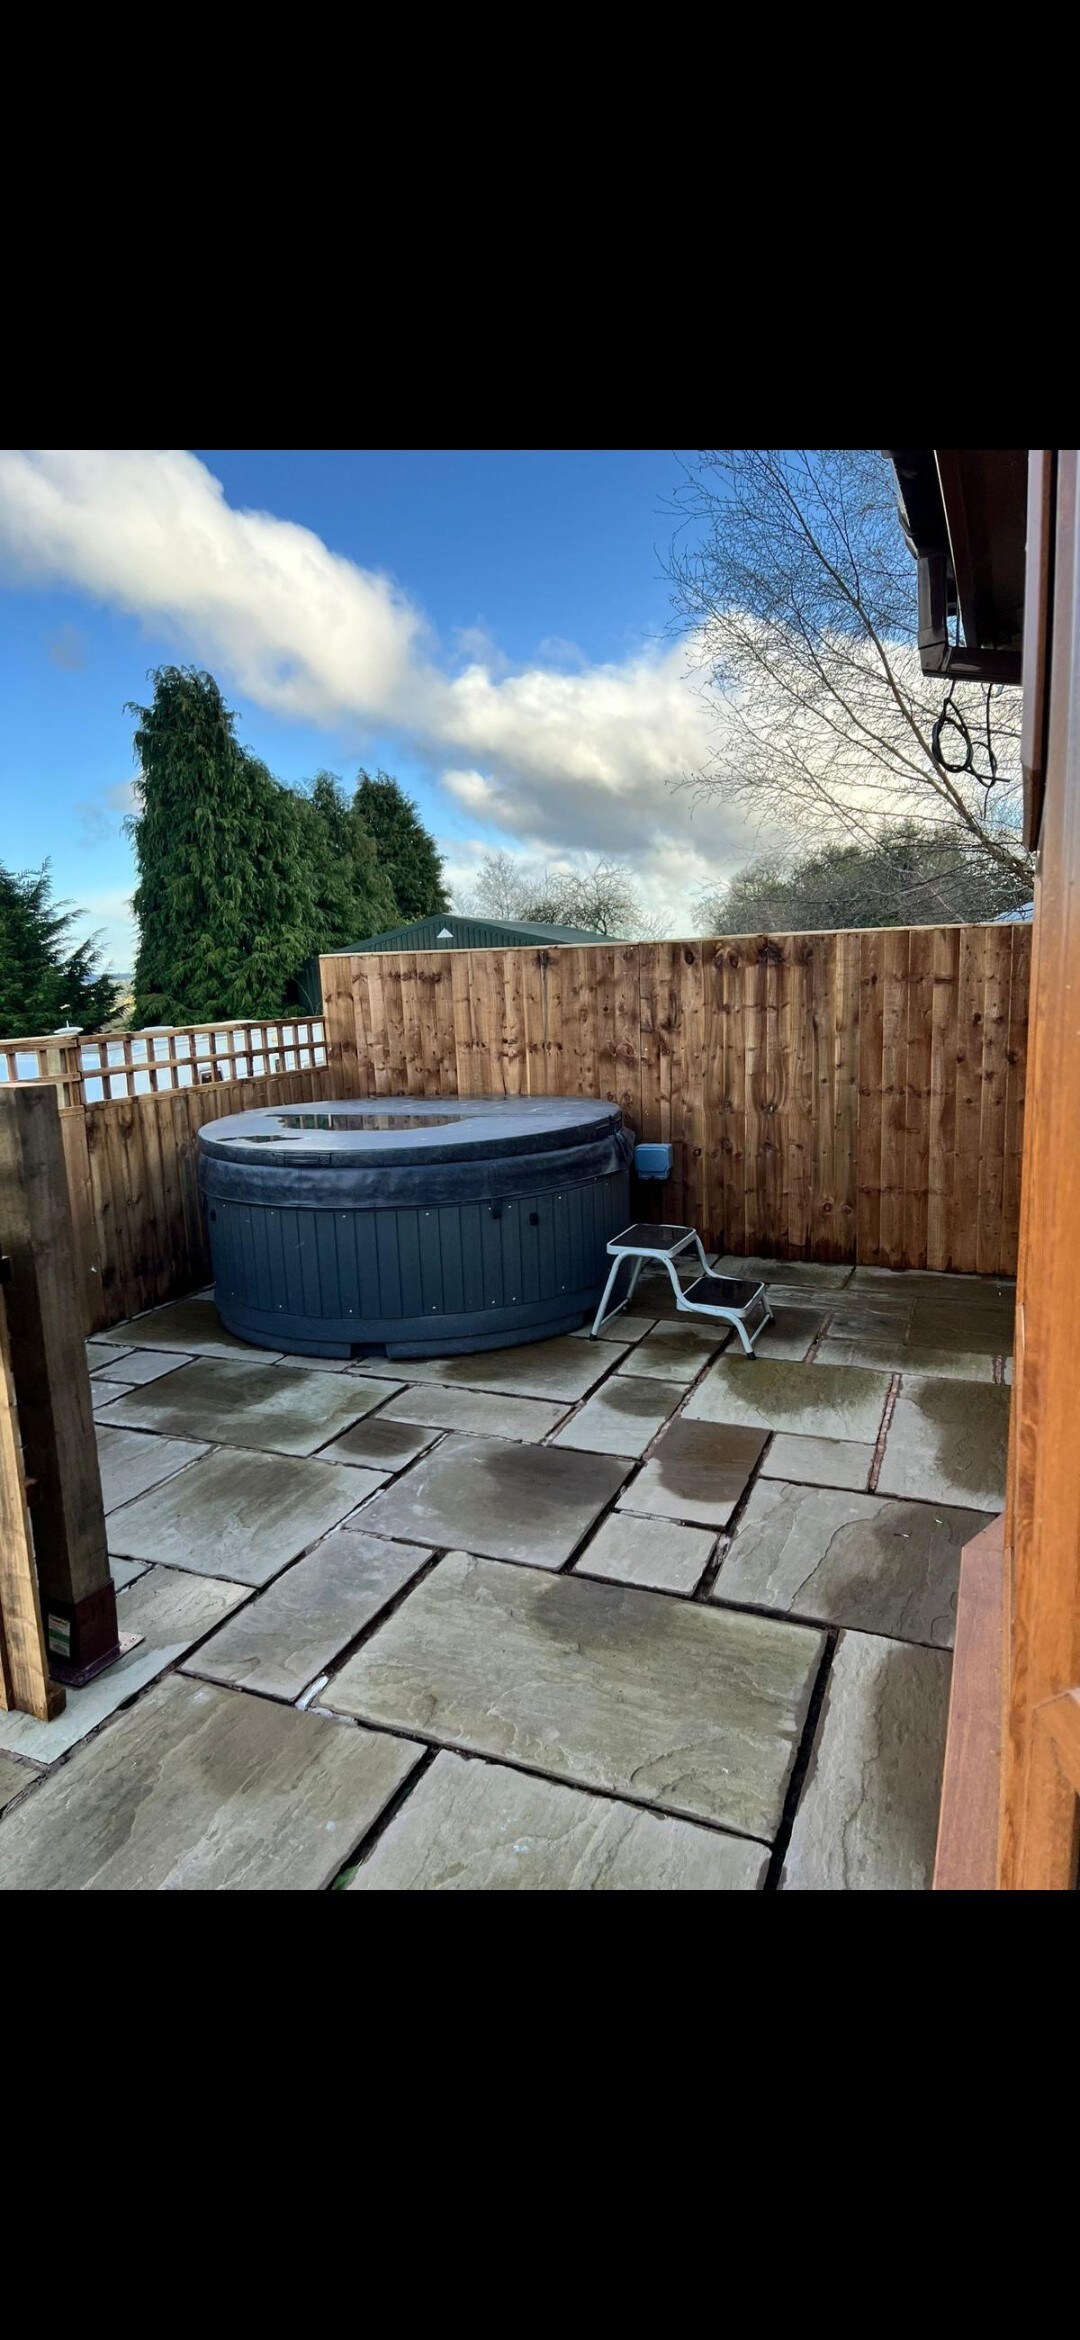 badgers rest lodge with hotub